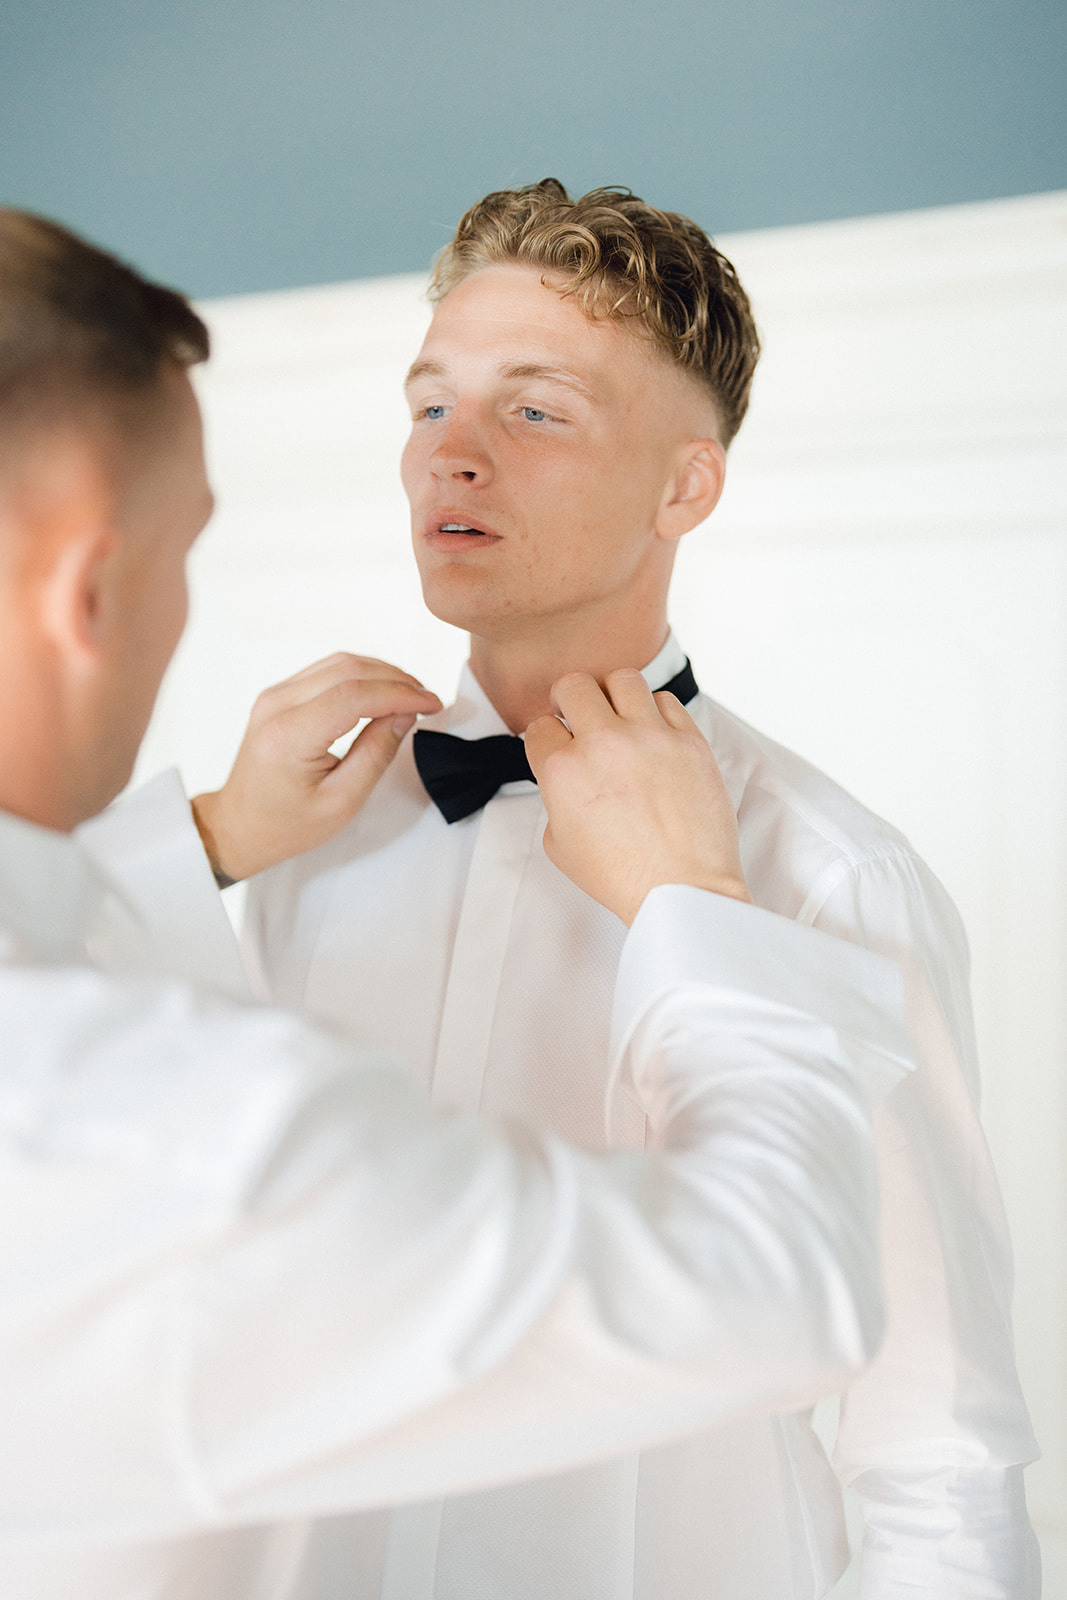 The groom's best man helping him put on the bow tie